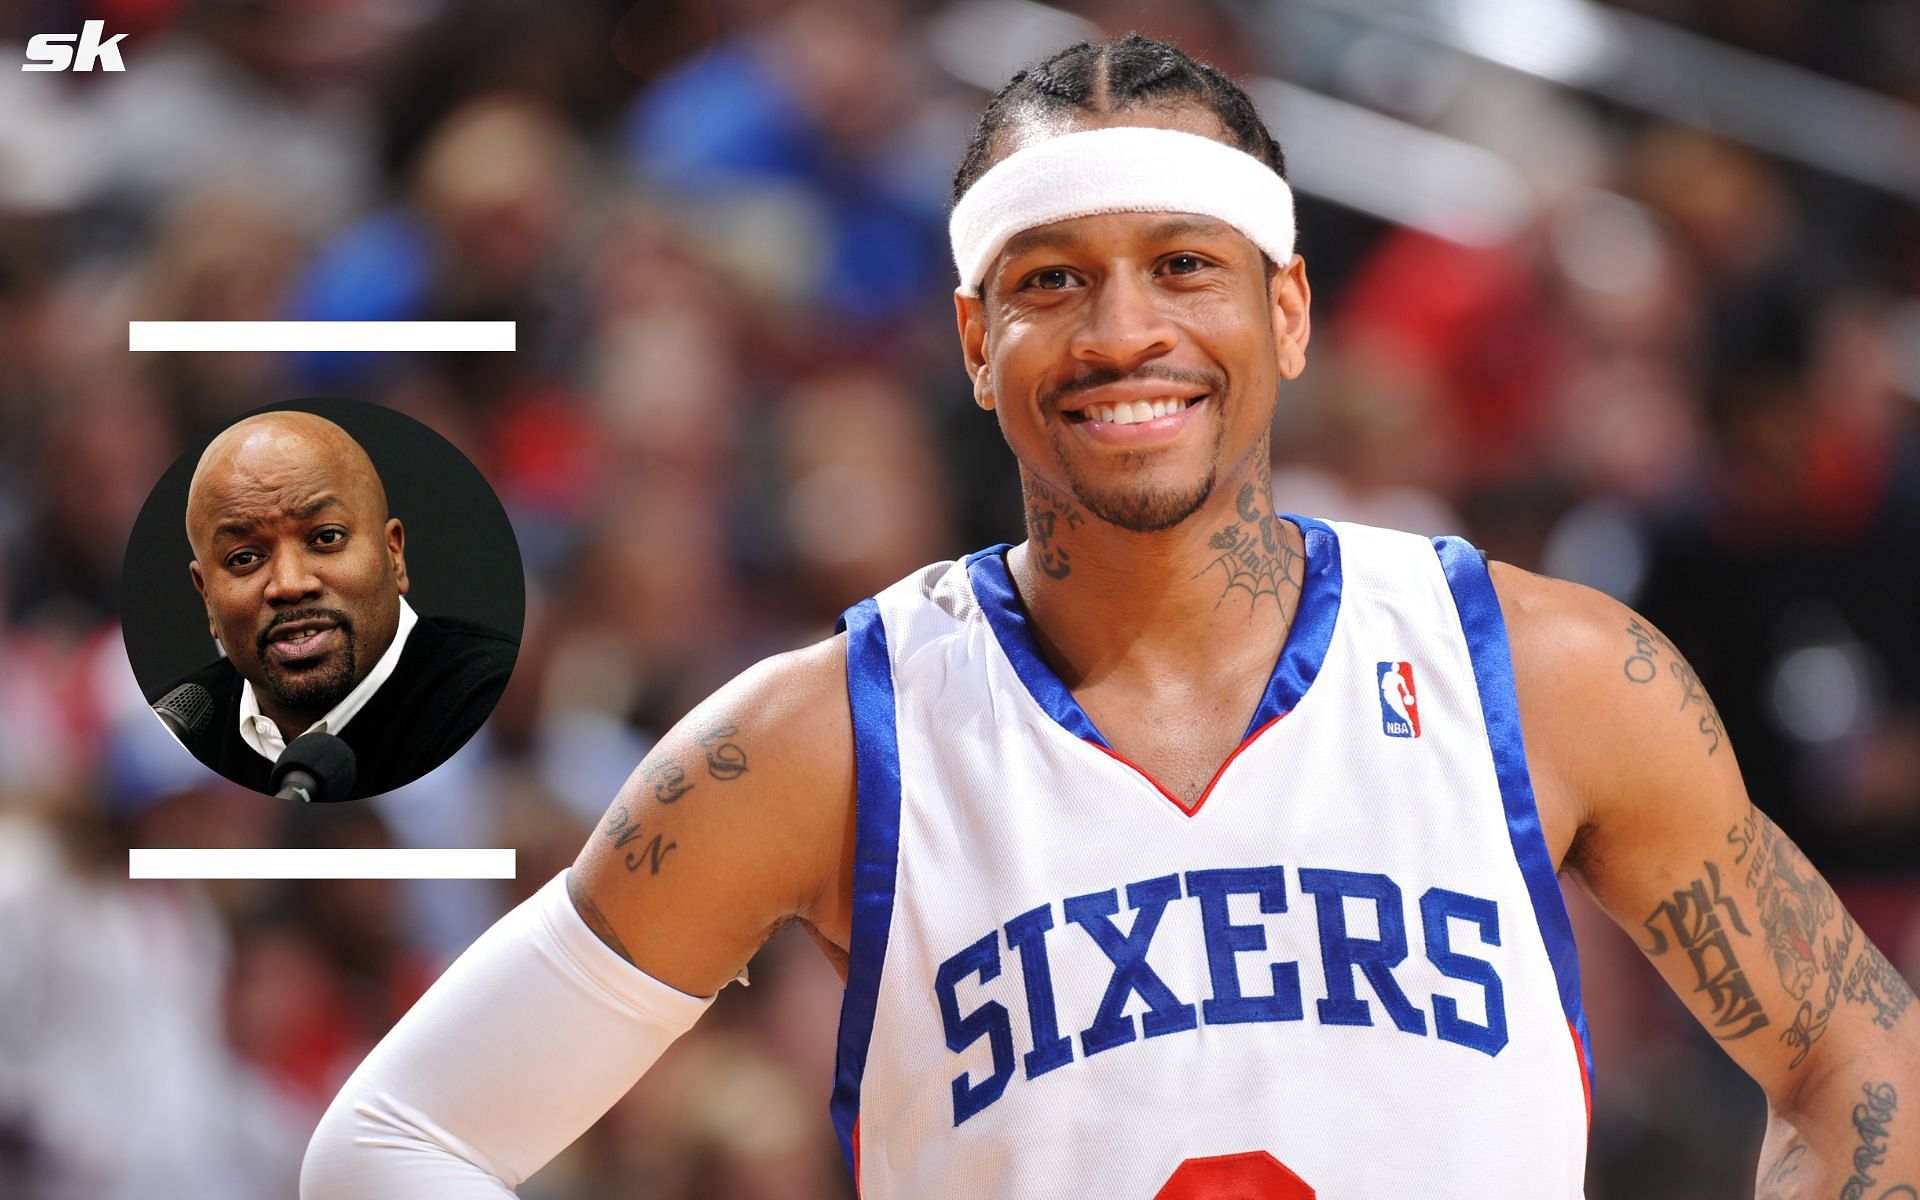 Allen Iverson to the NBA D-League? Take a Look at the Pros & Cons